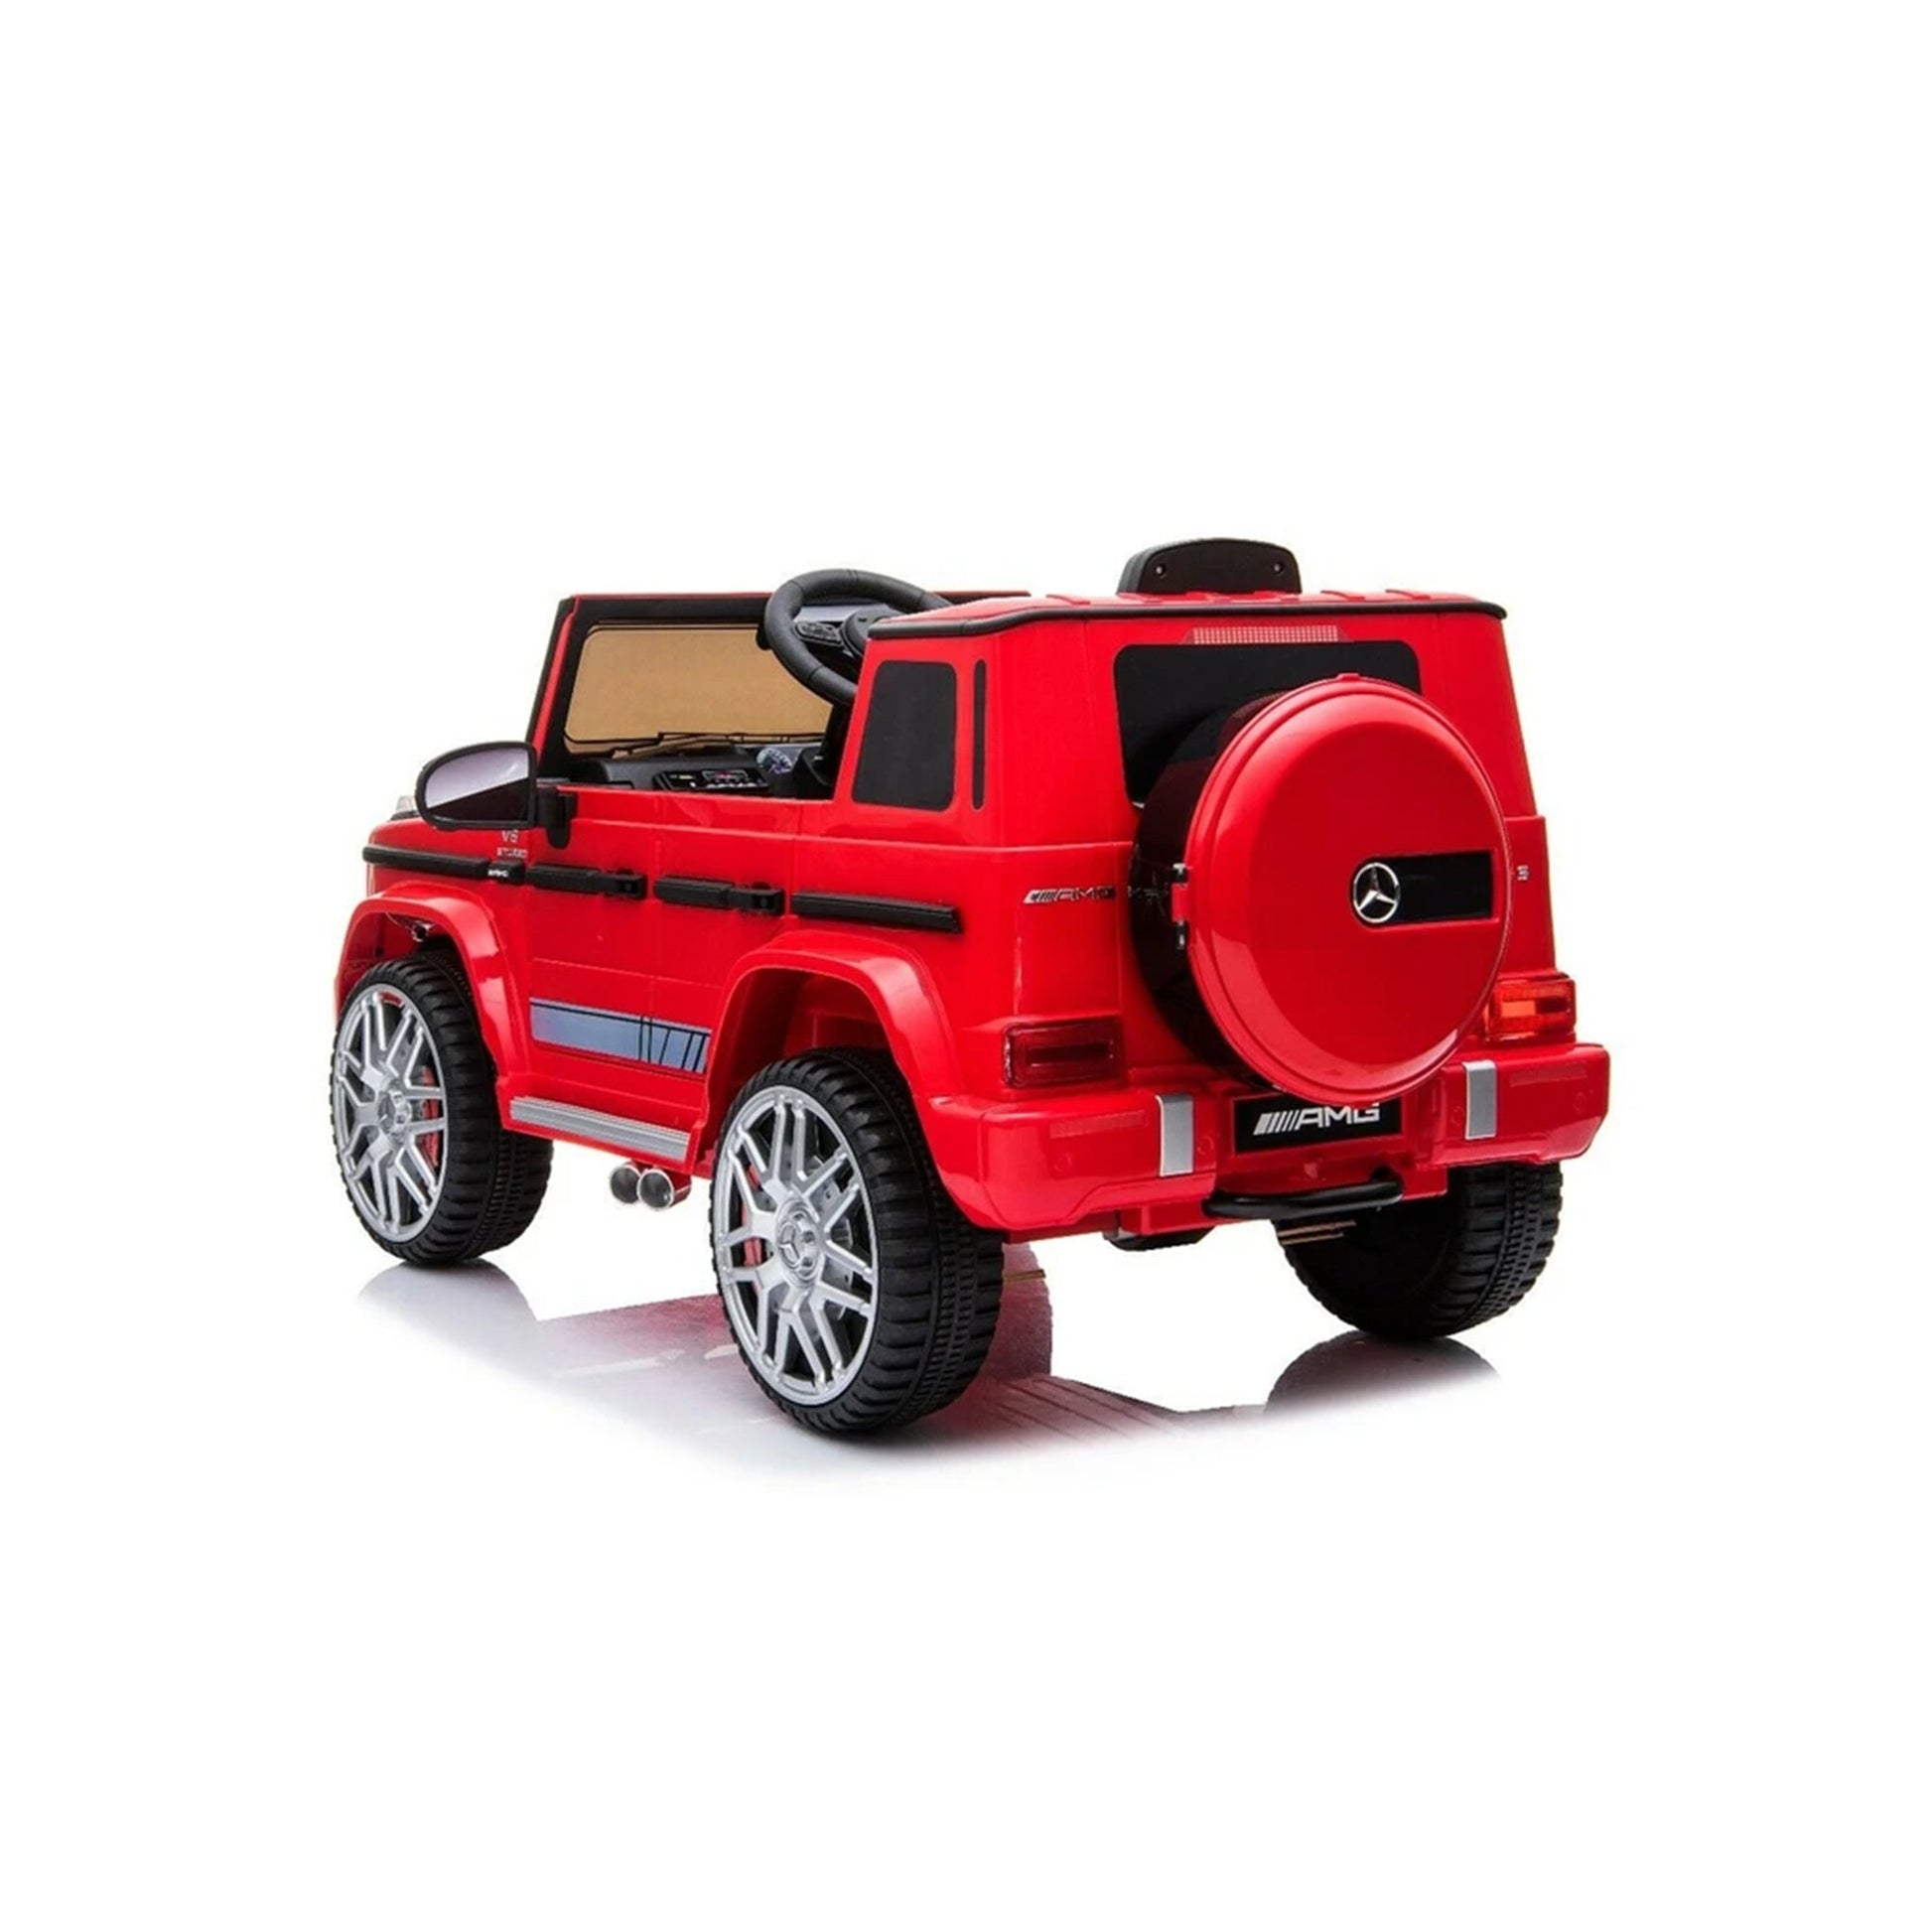 "Red Mercedes G63 AMG 12 Volt Electric Ride on Car at Kids Car Store with Parental Remote Controls"